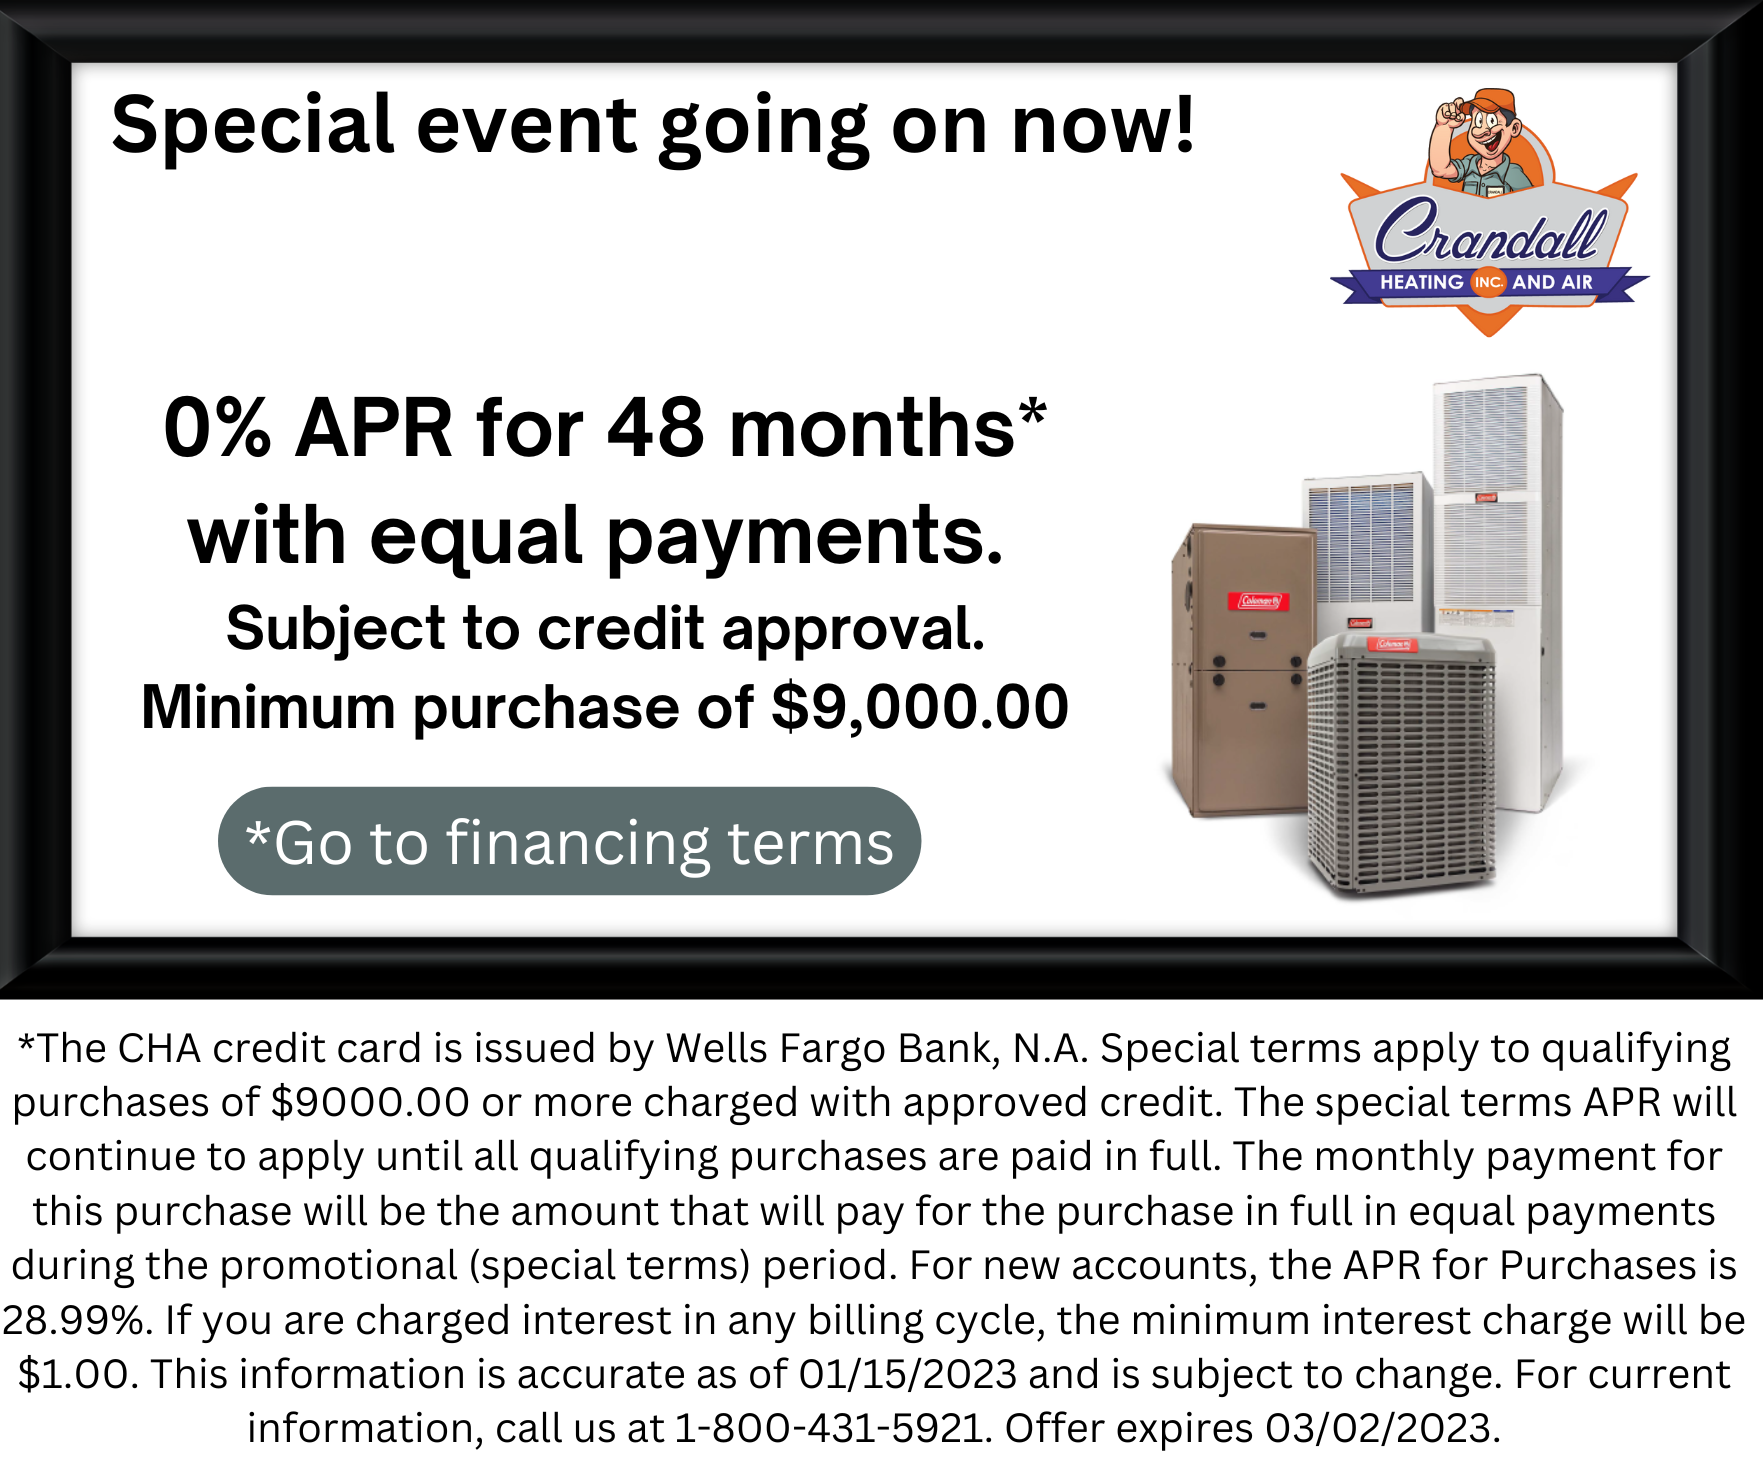 Special Financing - O% apr for 48 months